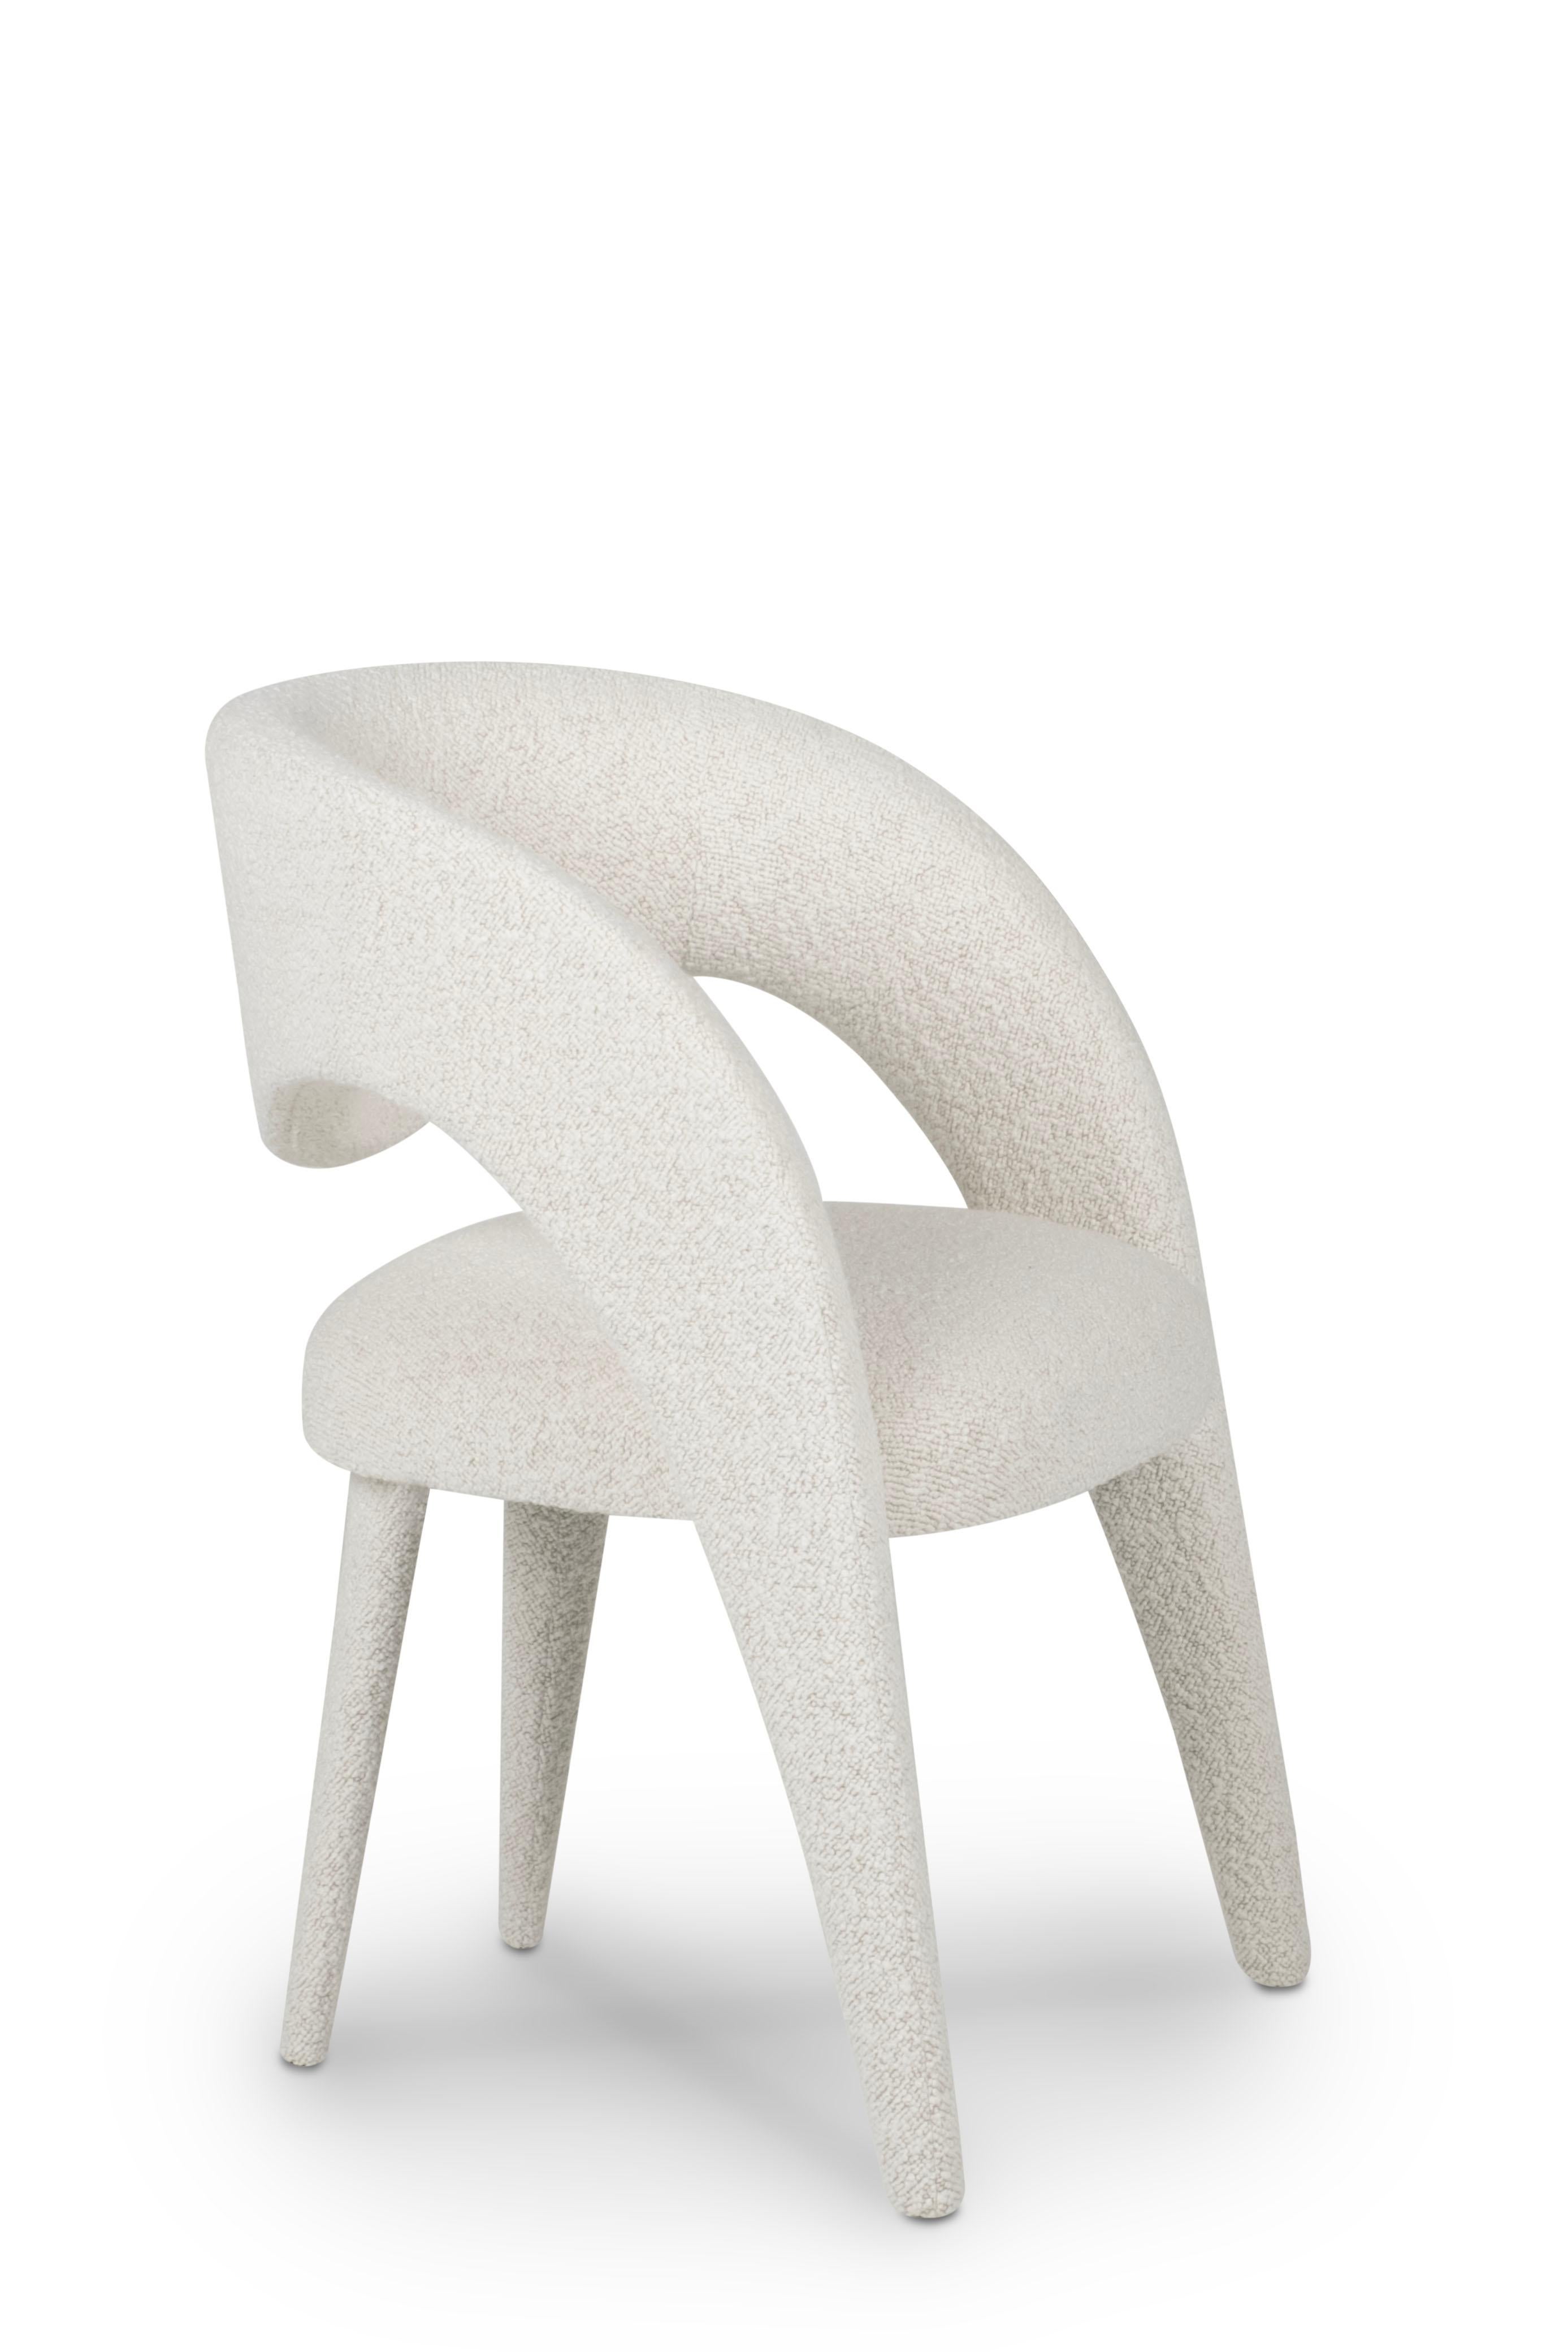 Contemporary Modern Laurence Dining Chairs, DEDAR Bouclé, Handmade in Portugal by Greenapple For Sale